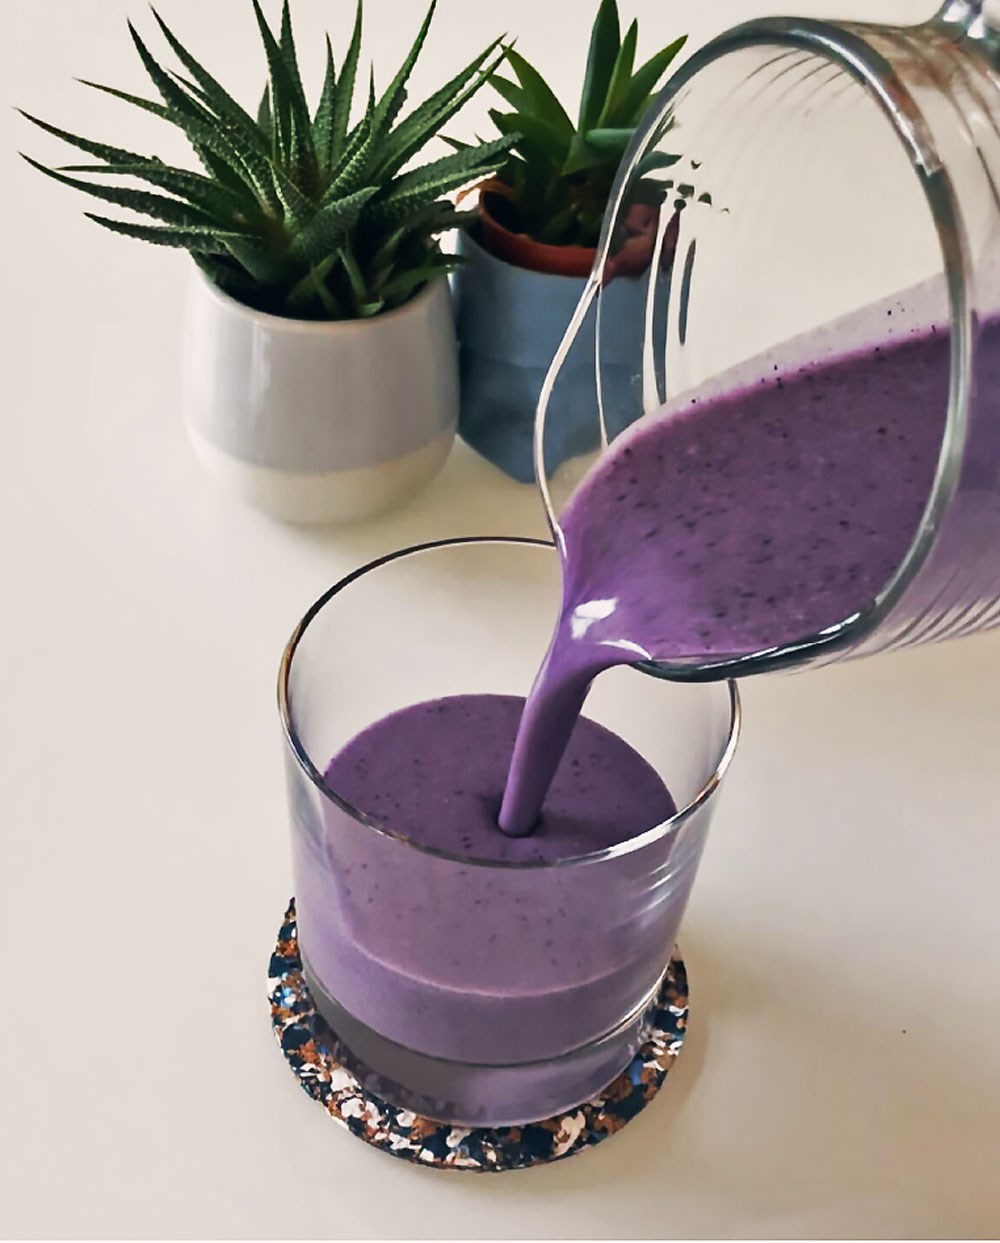 blueberry smoothie being poured in a cup with plants in the background